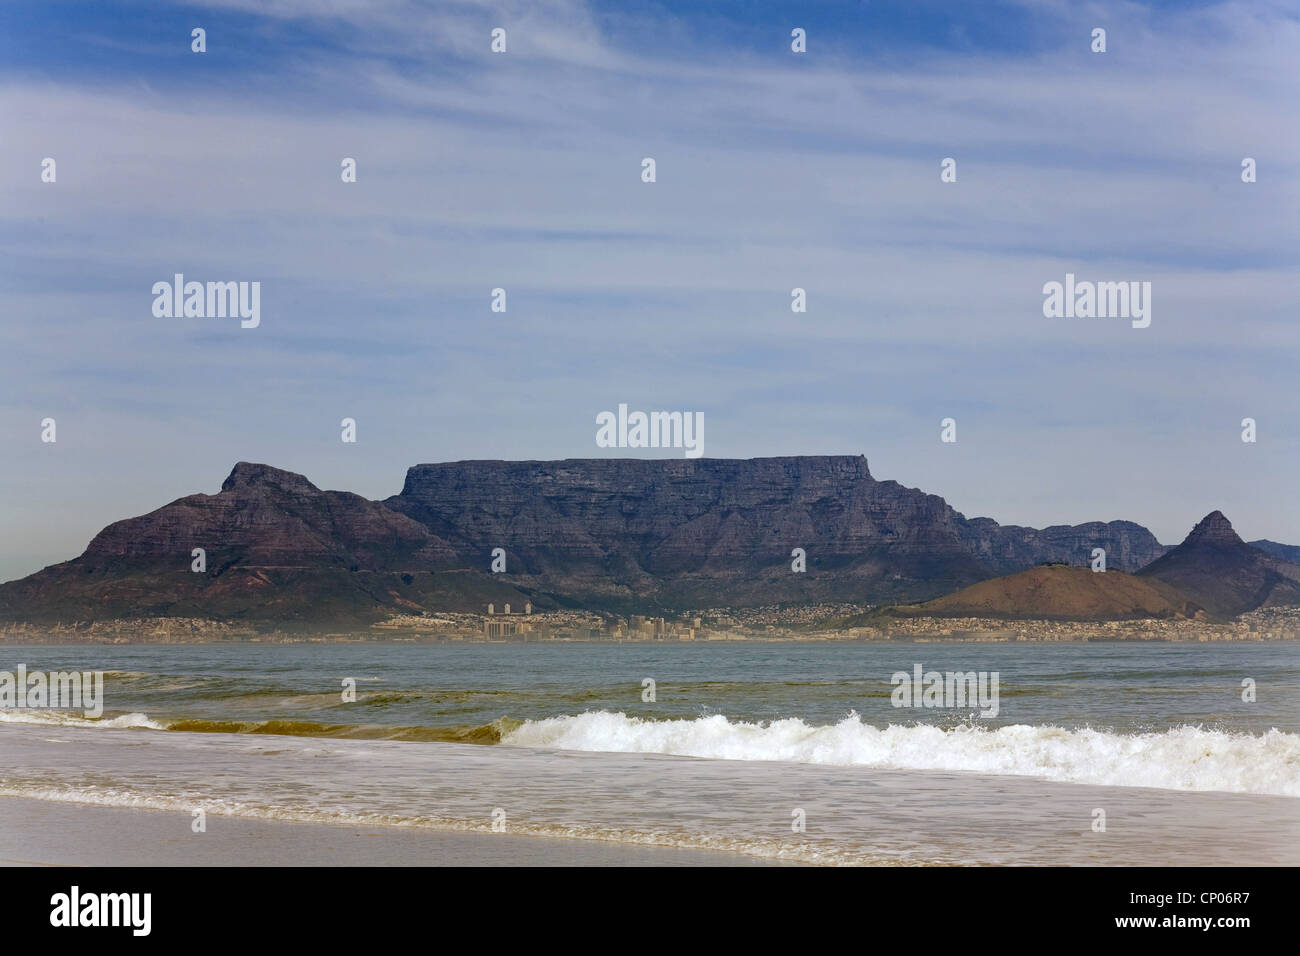 beach and Table Mountain, South Africa, Western Cape, Bloubergstrand, Capetown Stock Photo